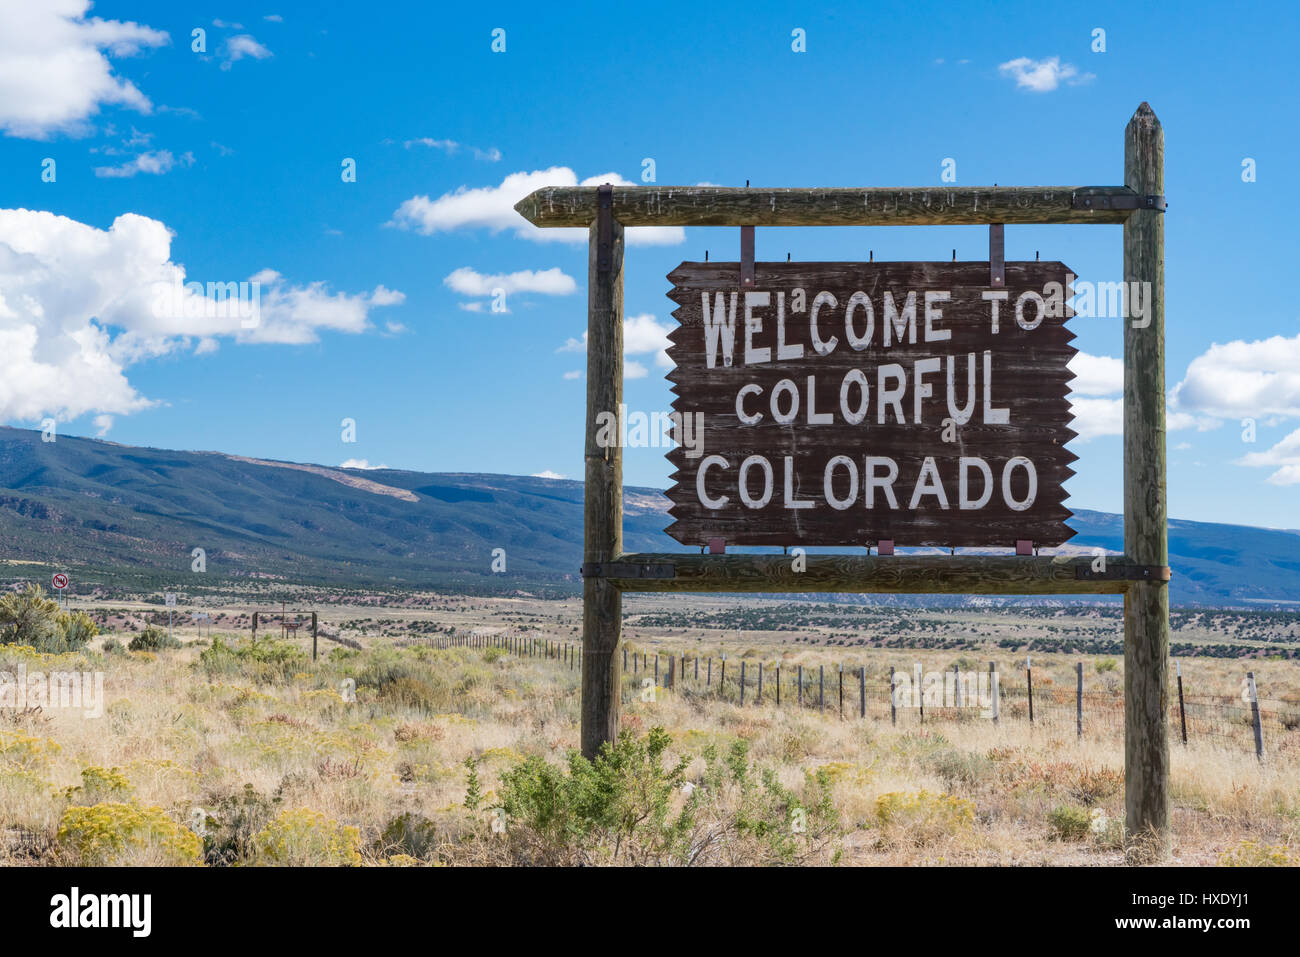 Welcome to colorful Colorado sign along the Colorado and Utah border. Stock Photo